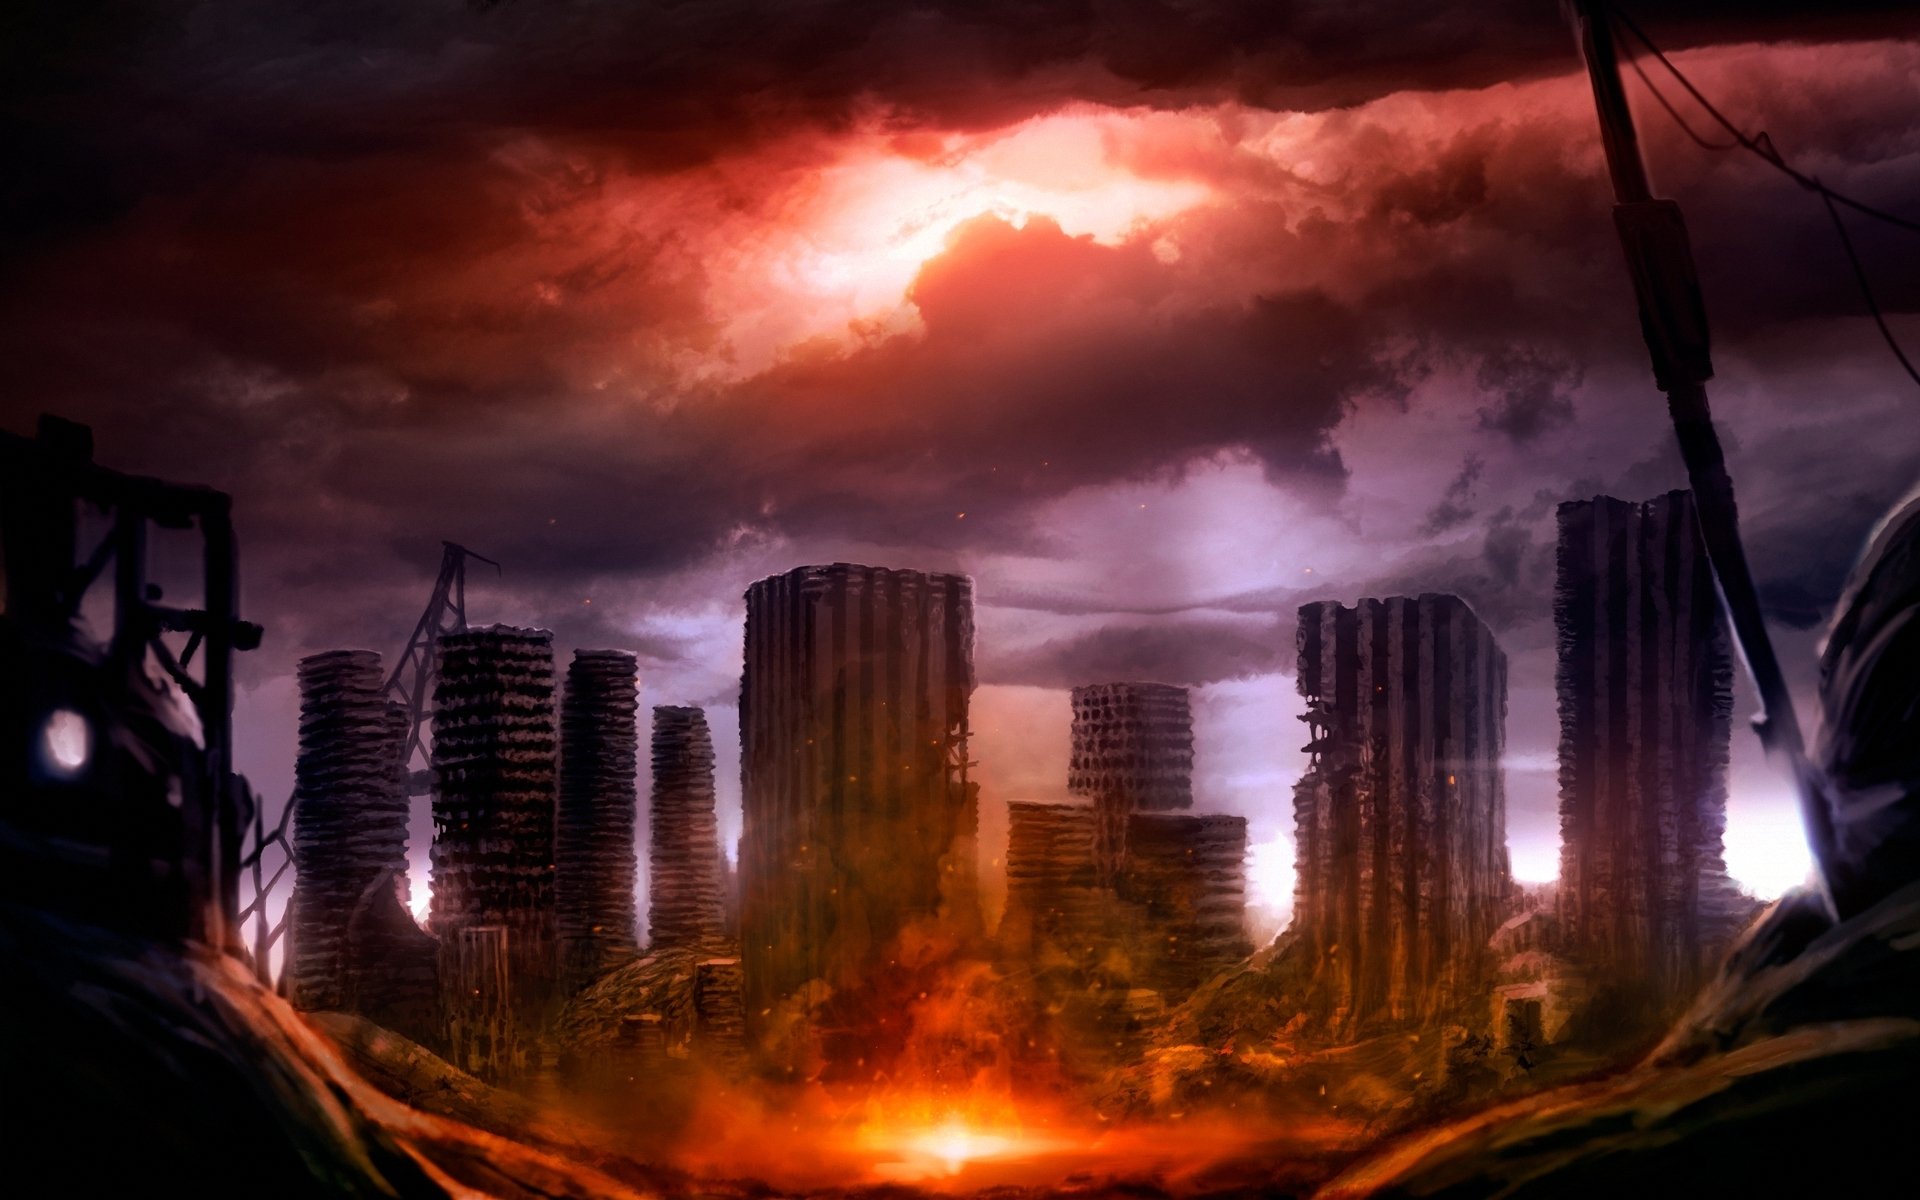 Romantically Apocalyptic HD Wallpaper by Vitaly S. Alexius